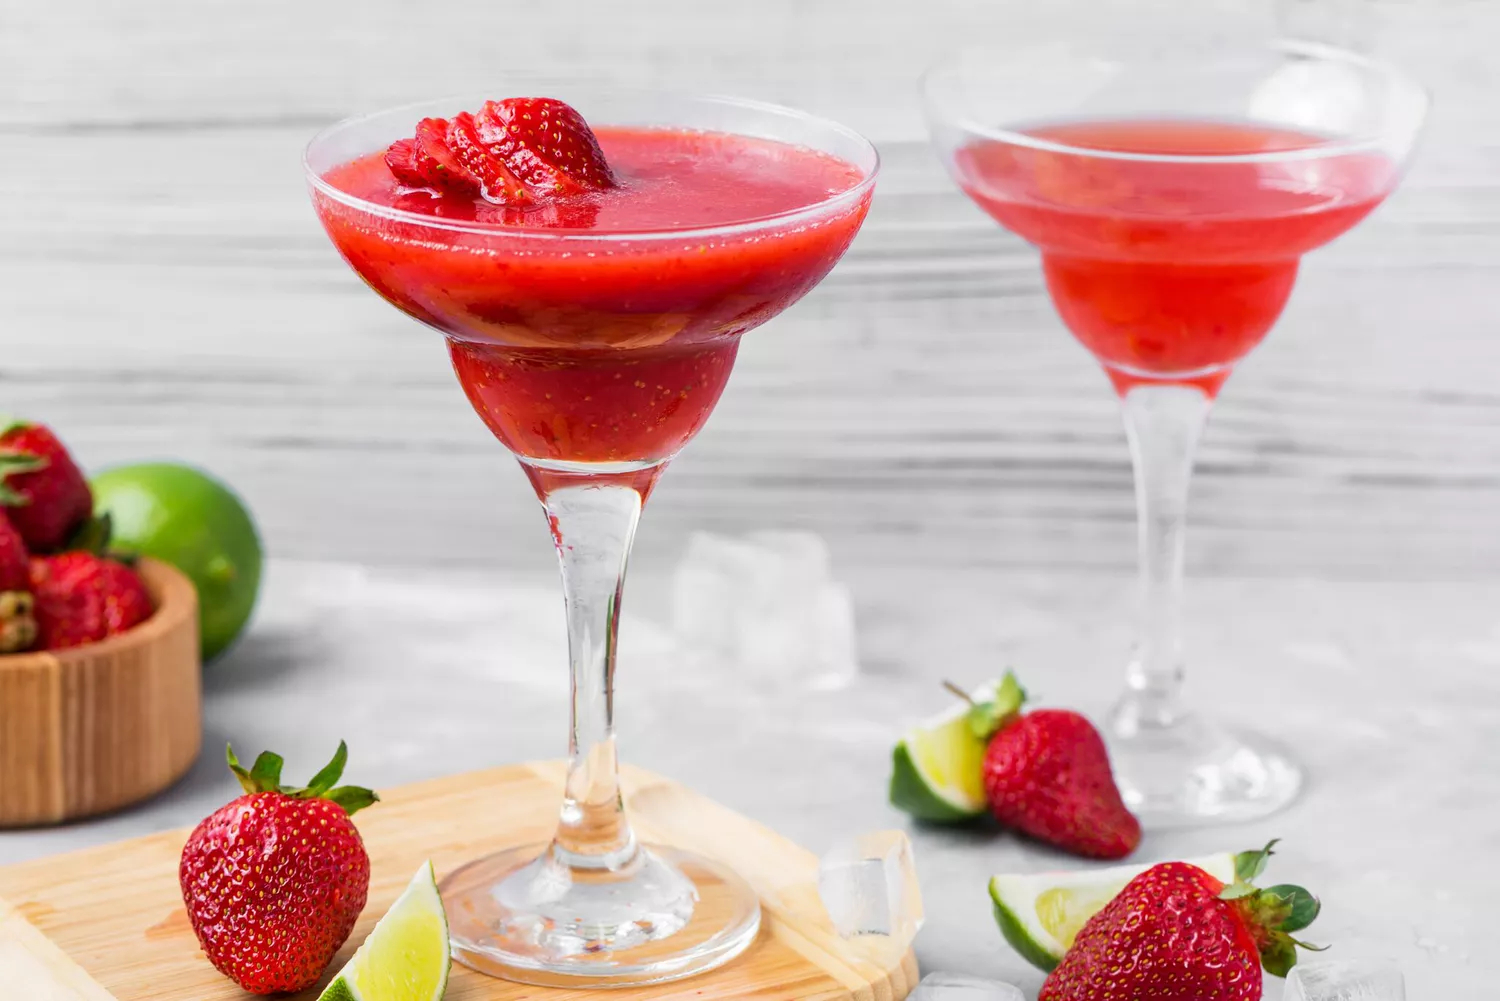 How To Make A Strawberry Daiquiri With A Blender | Storables